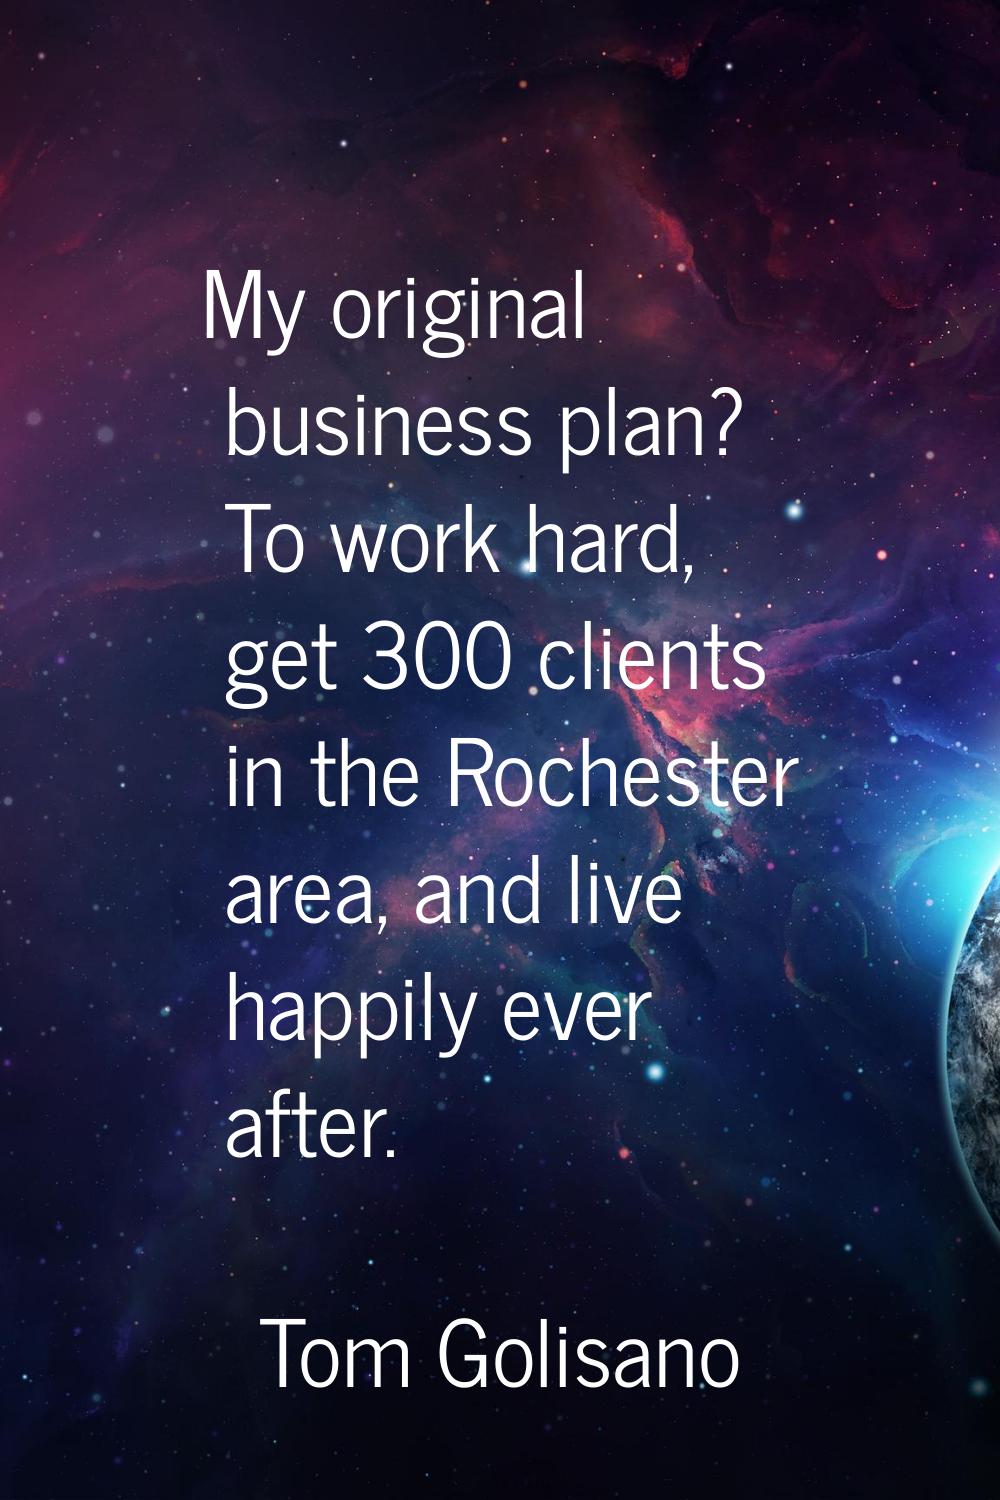 My original business plan? To work hard, get 300 clients in the Rochester area, and live happily ev